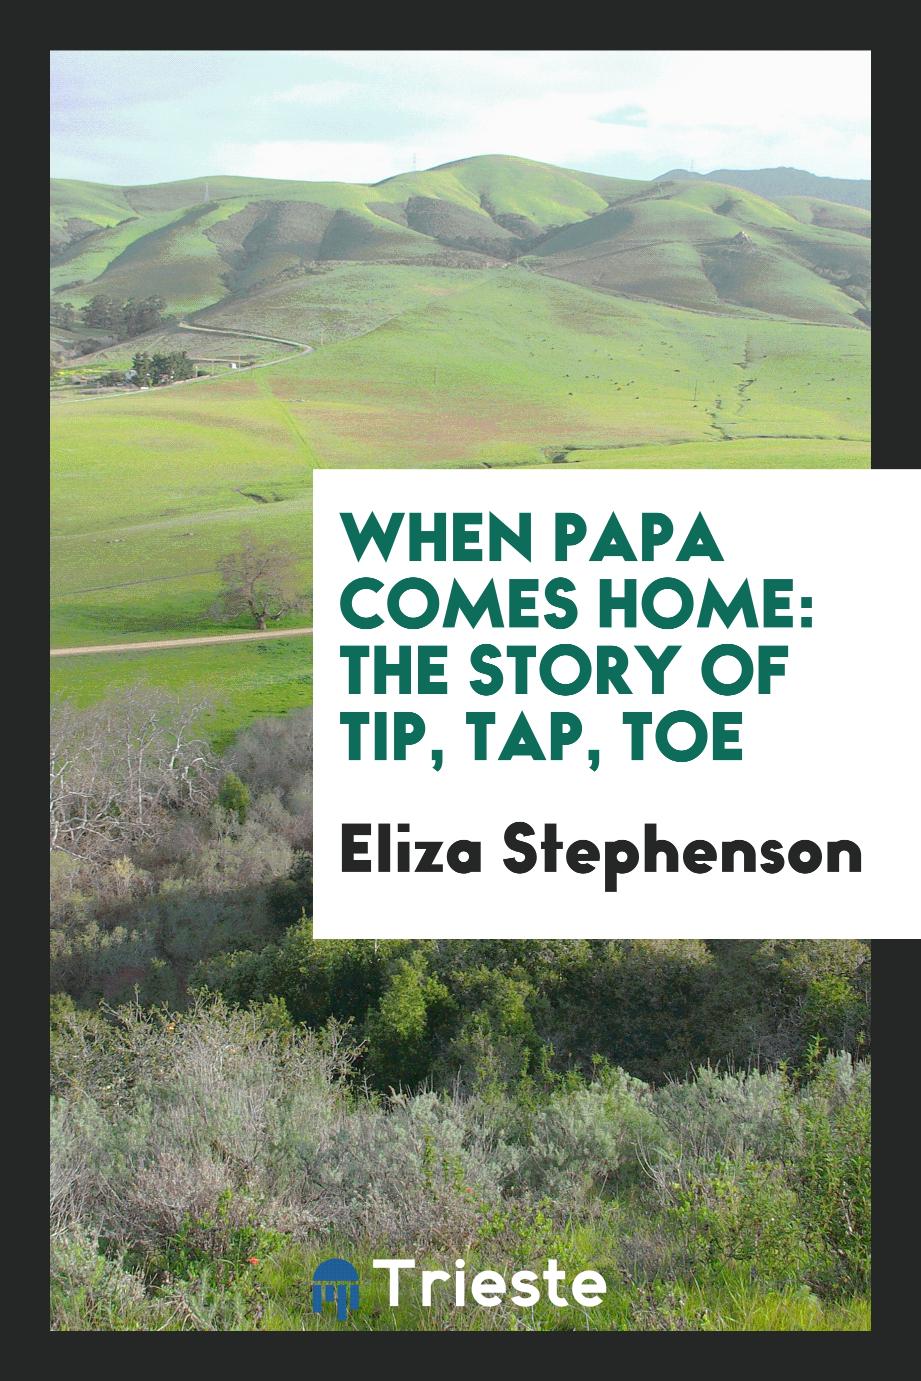 When Papa Comes Home: The Story of Tip, Tap, Toe